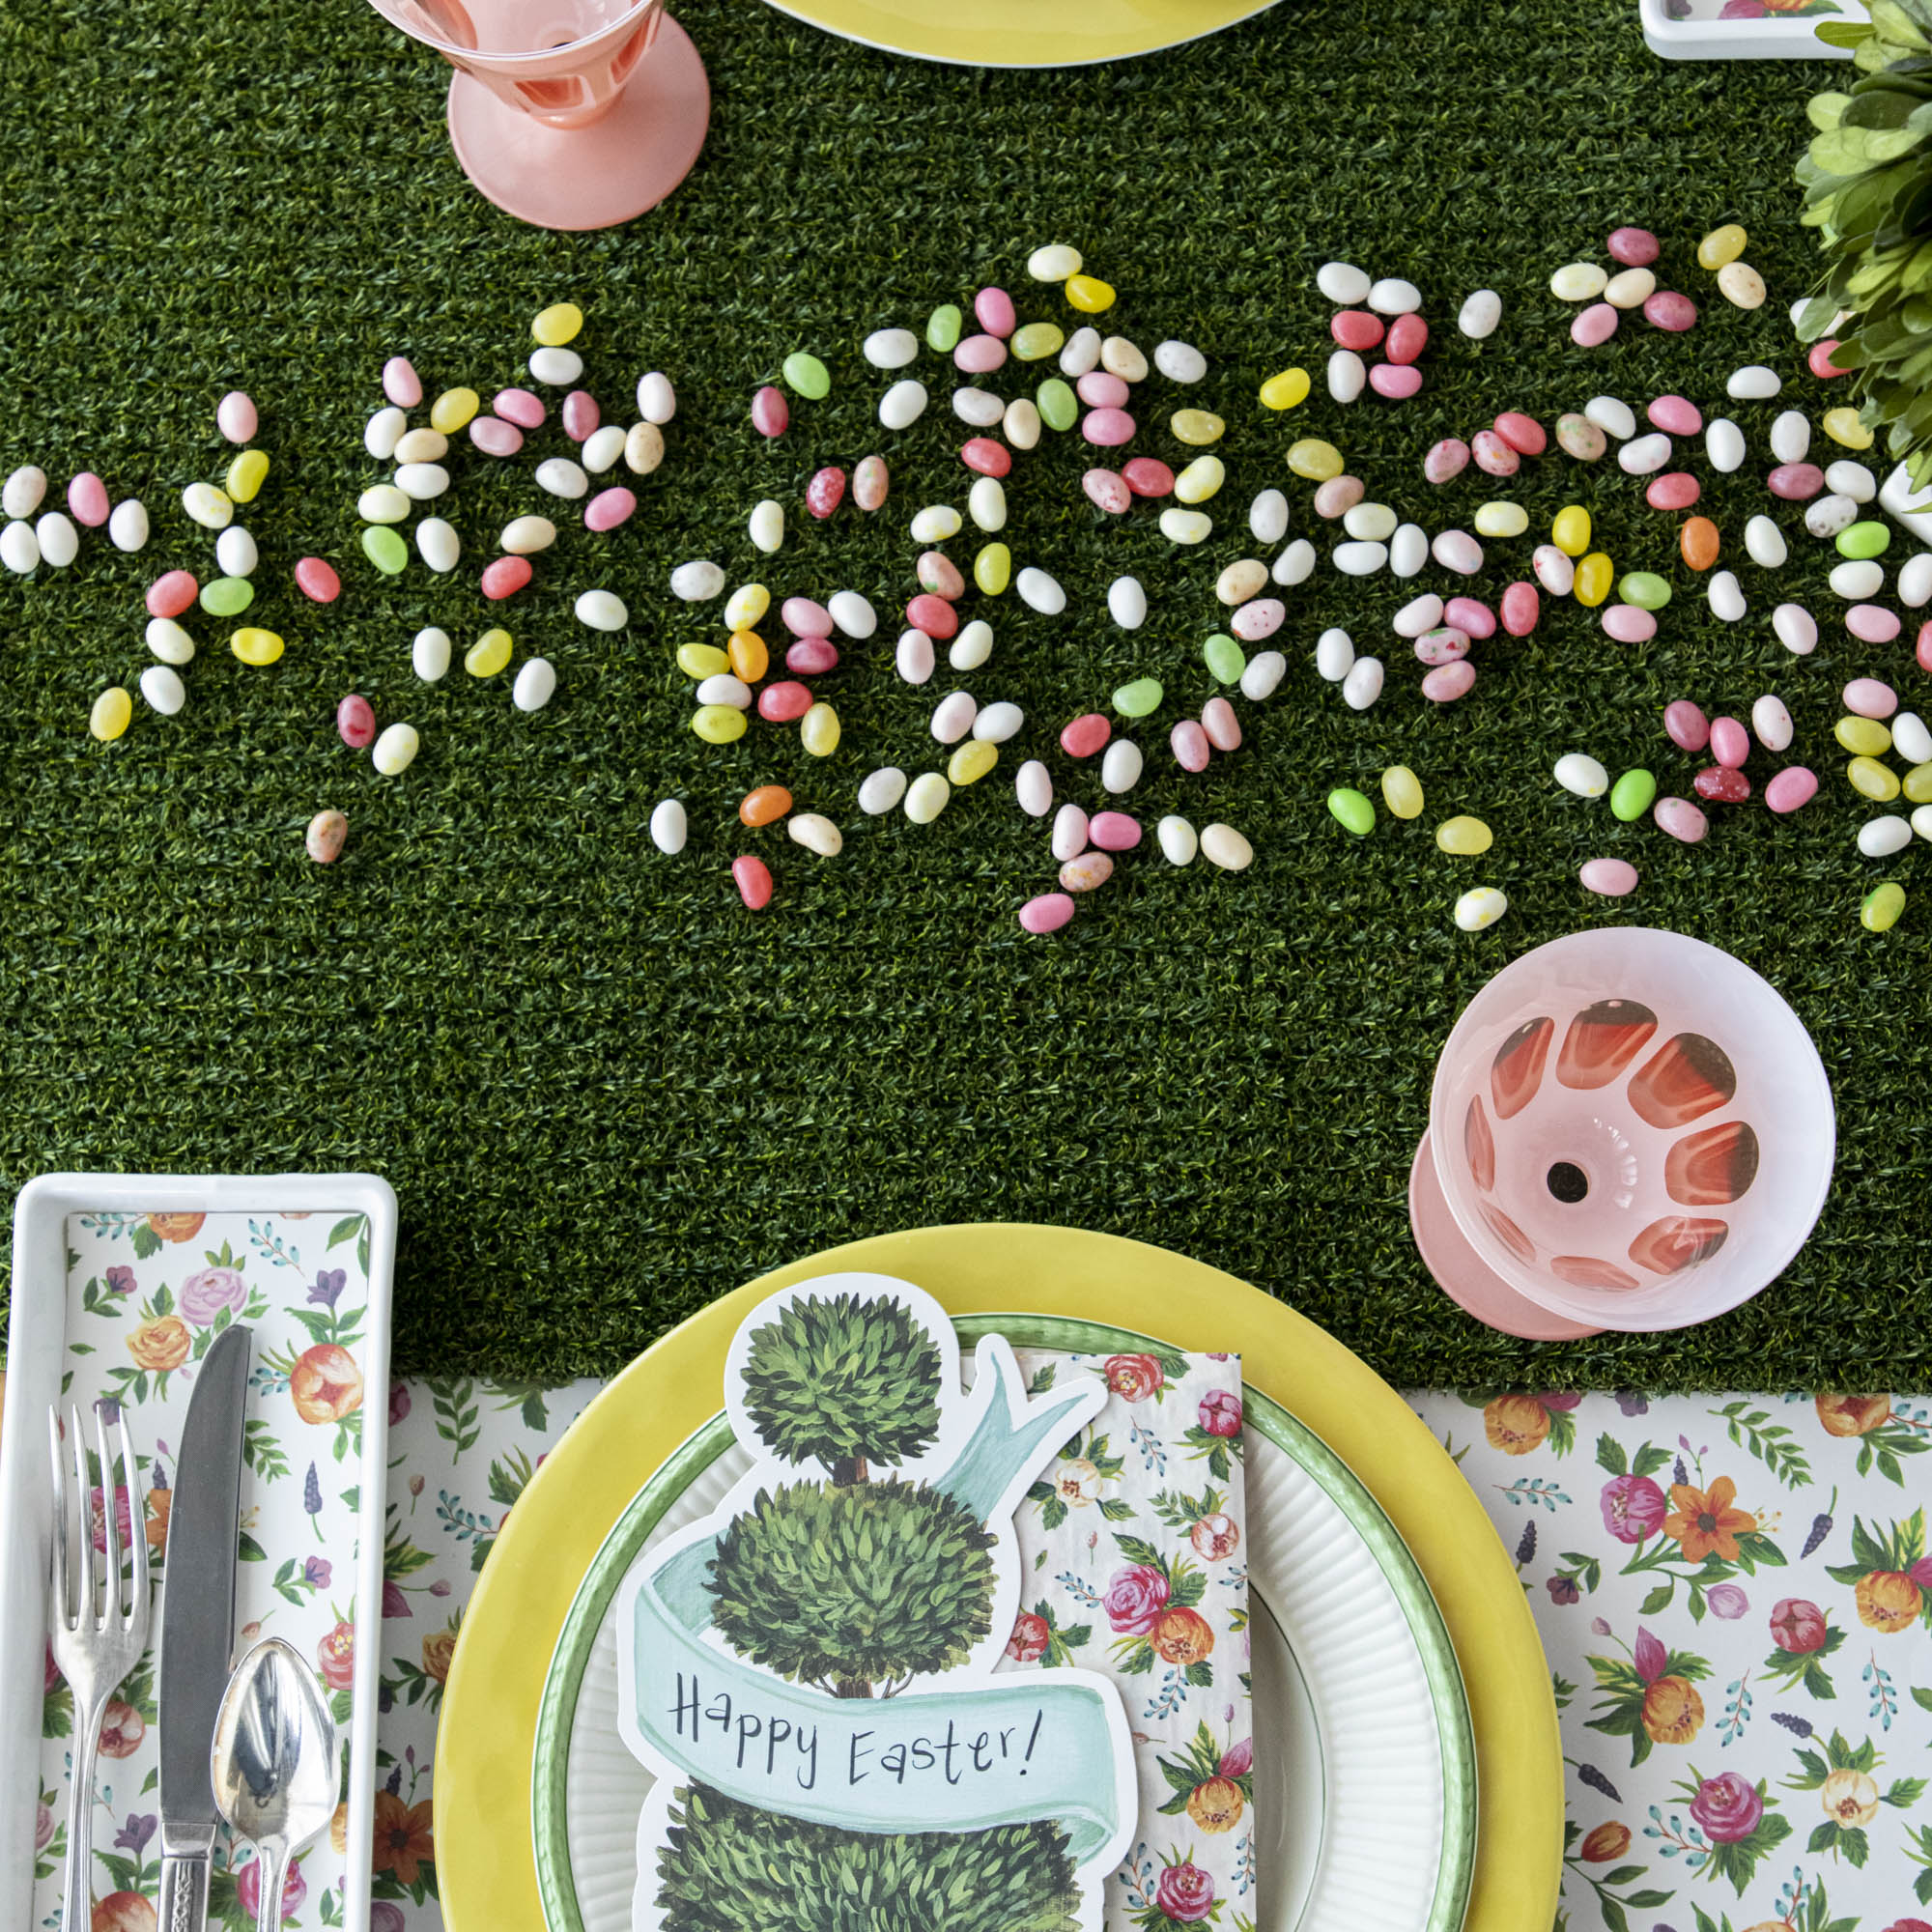 A festive table setting with easter eggs, plates, napkins, and utensils set on a Talking Tables Artificial Grass Table Runner. Perfect for a party celebration!